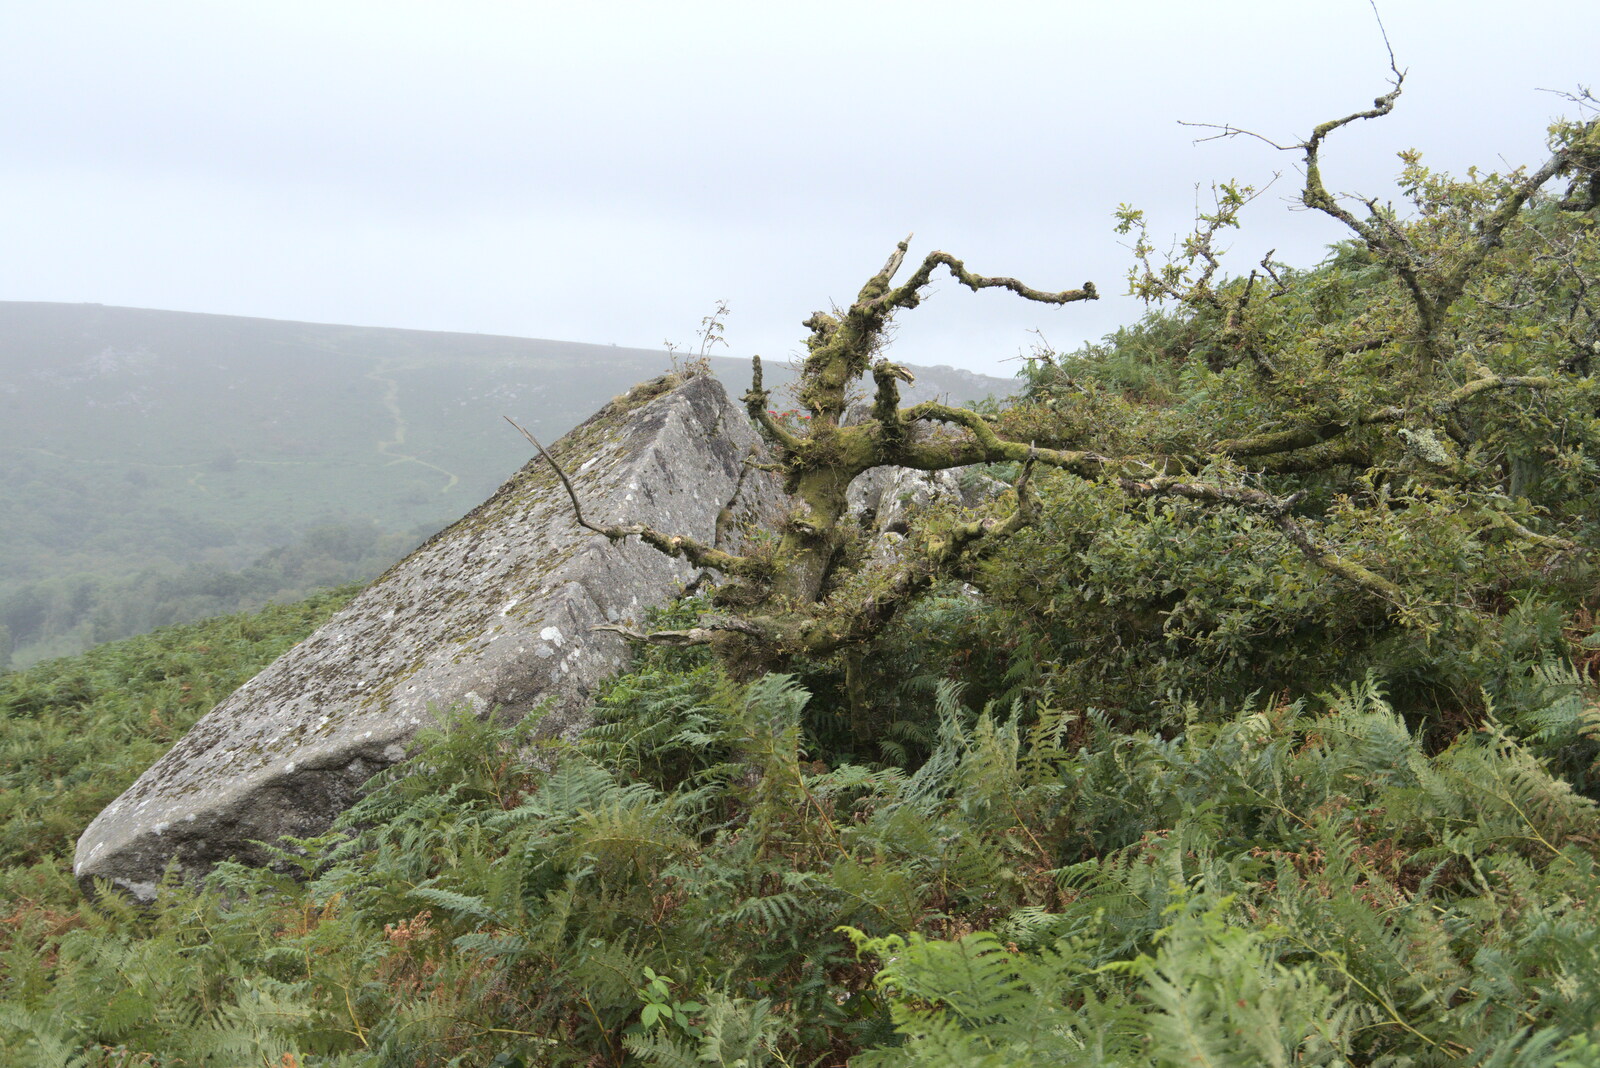 A tangled tree from A Walk up Hound Tor, Dartmoor, Devon - 24th August 2020